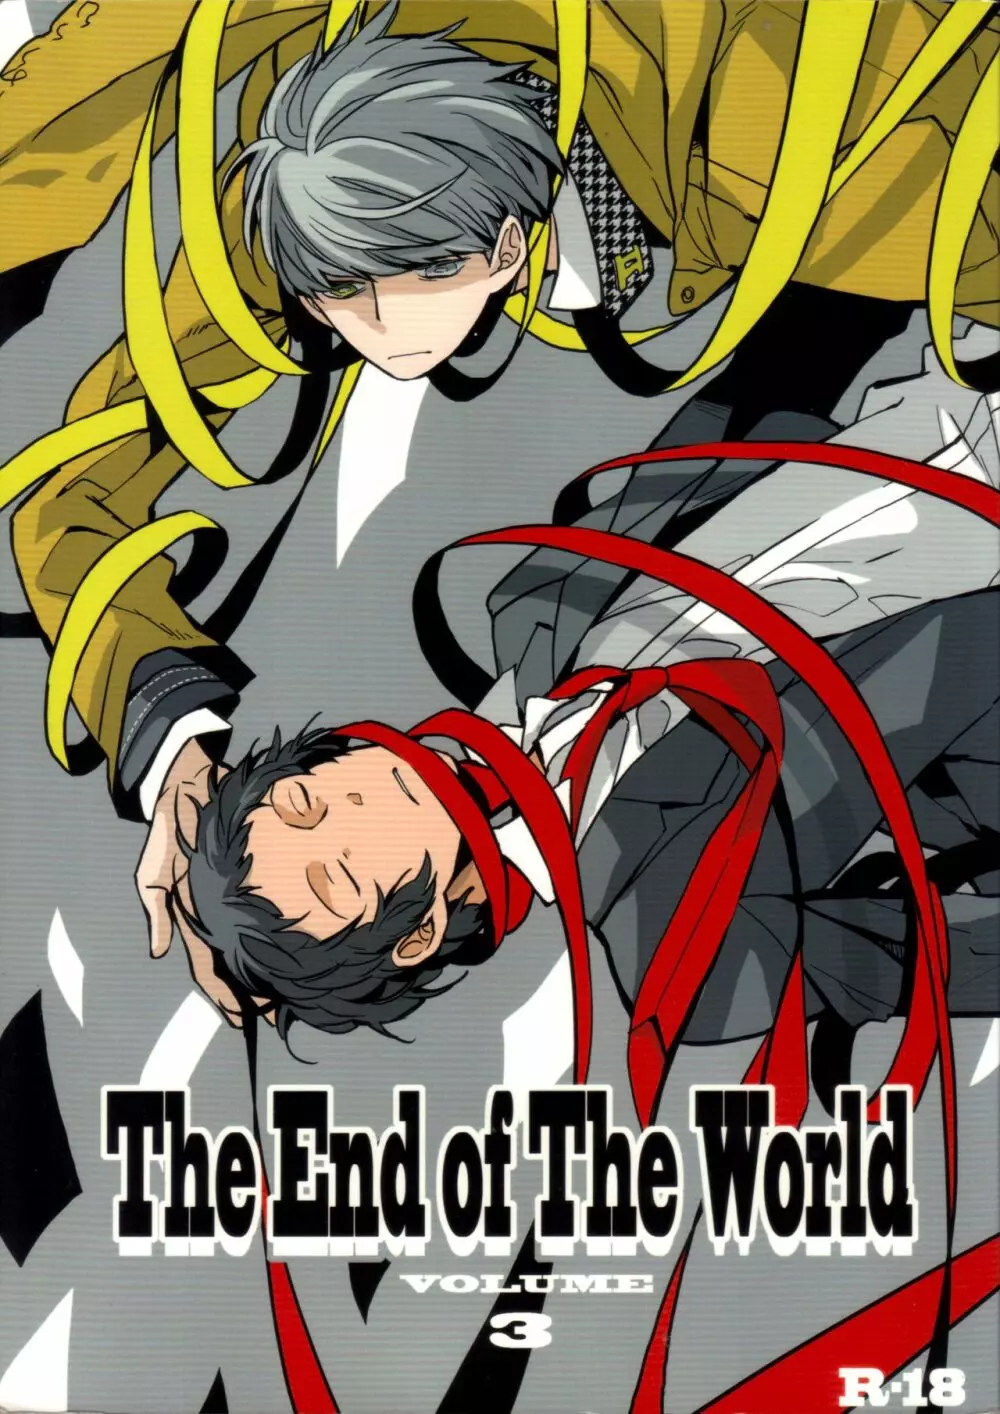 The End of The World volume 3